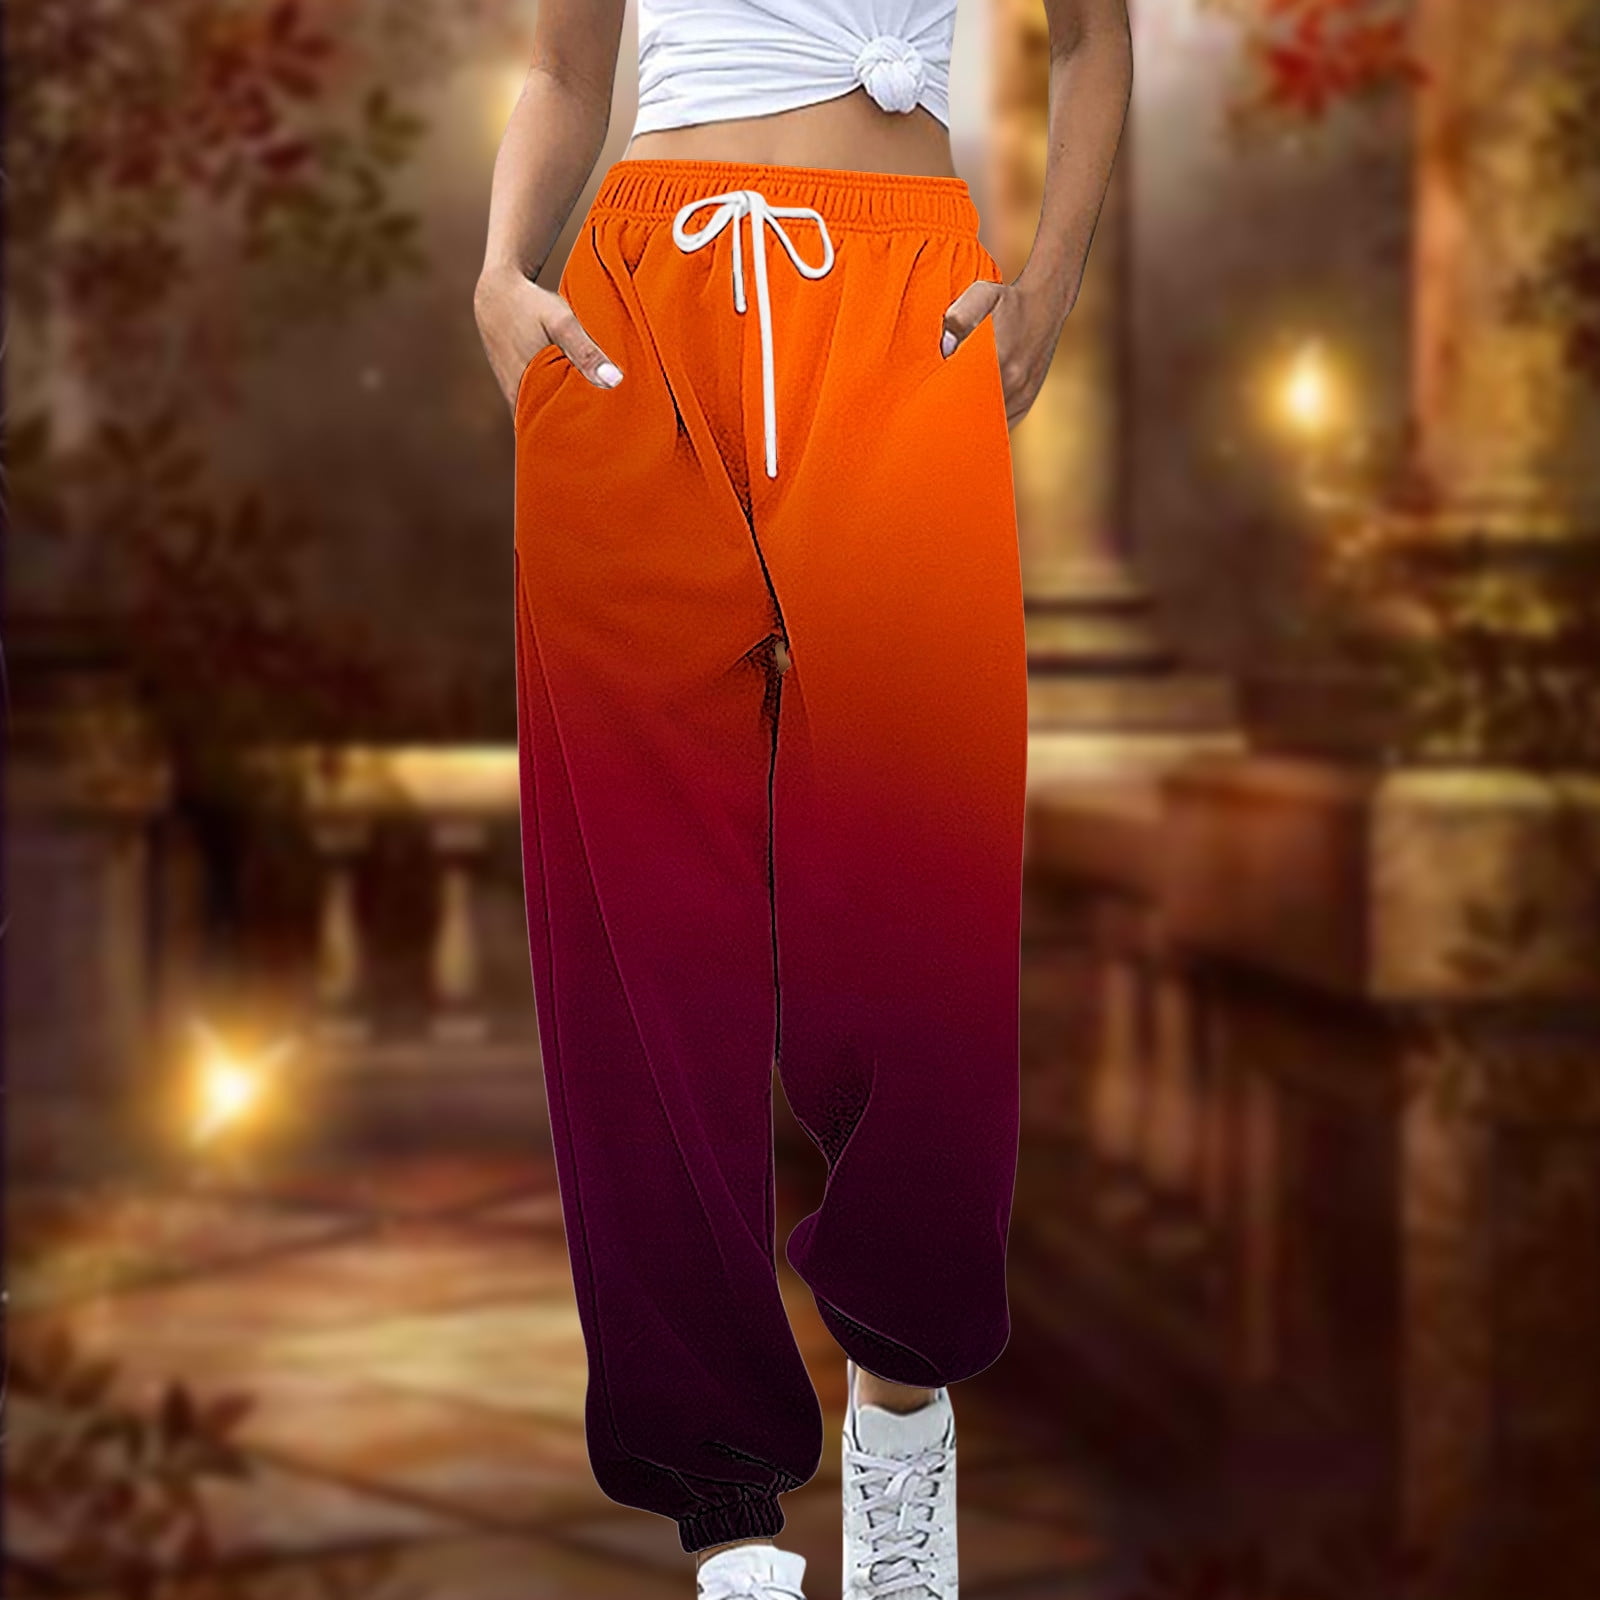 Frostluinai Sweatpants For Women With Pockets Cargo Pants High